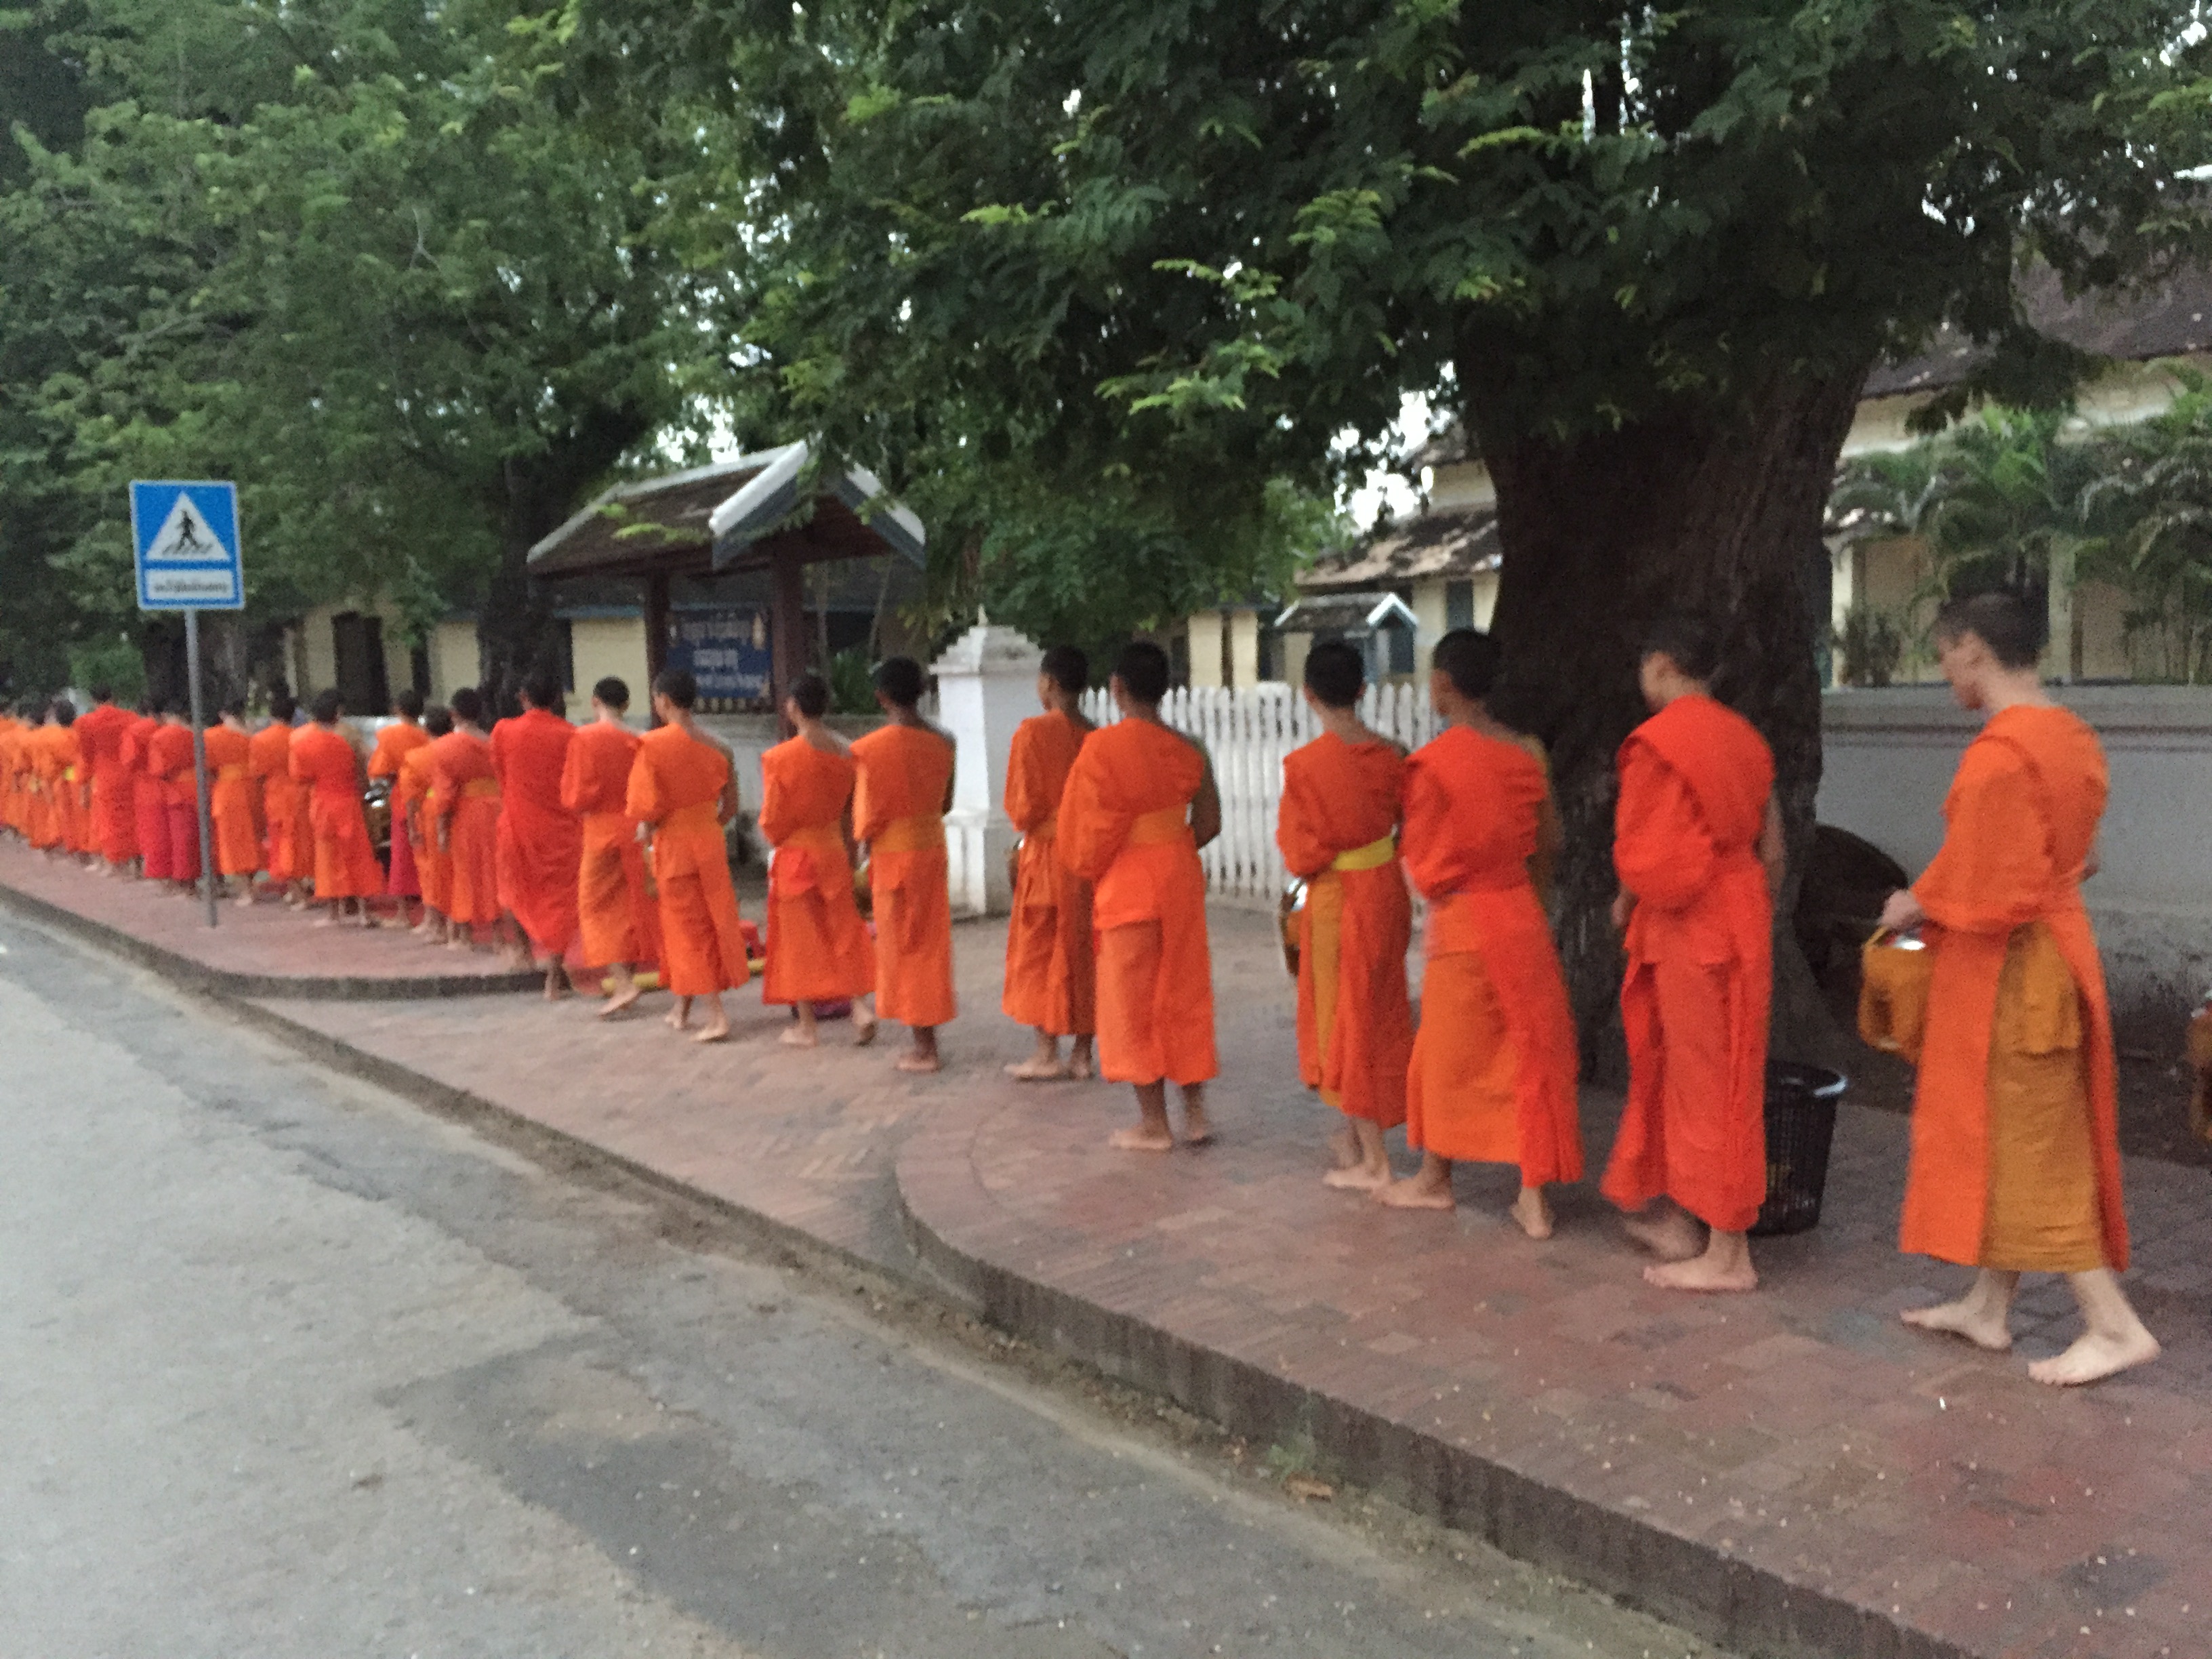 Monks in laos during my travels